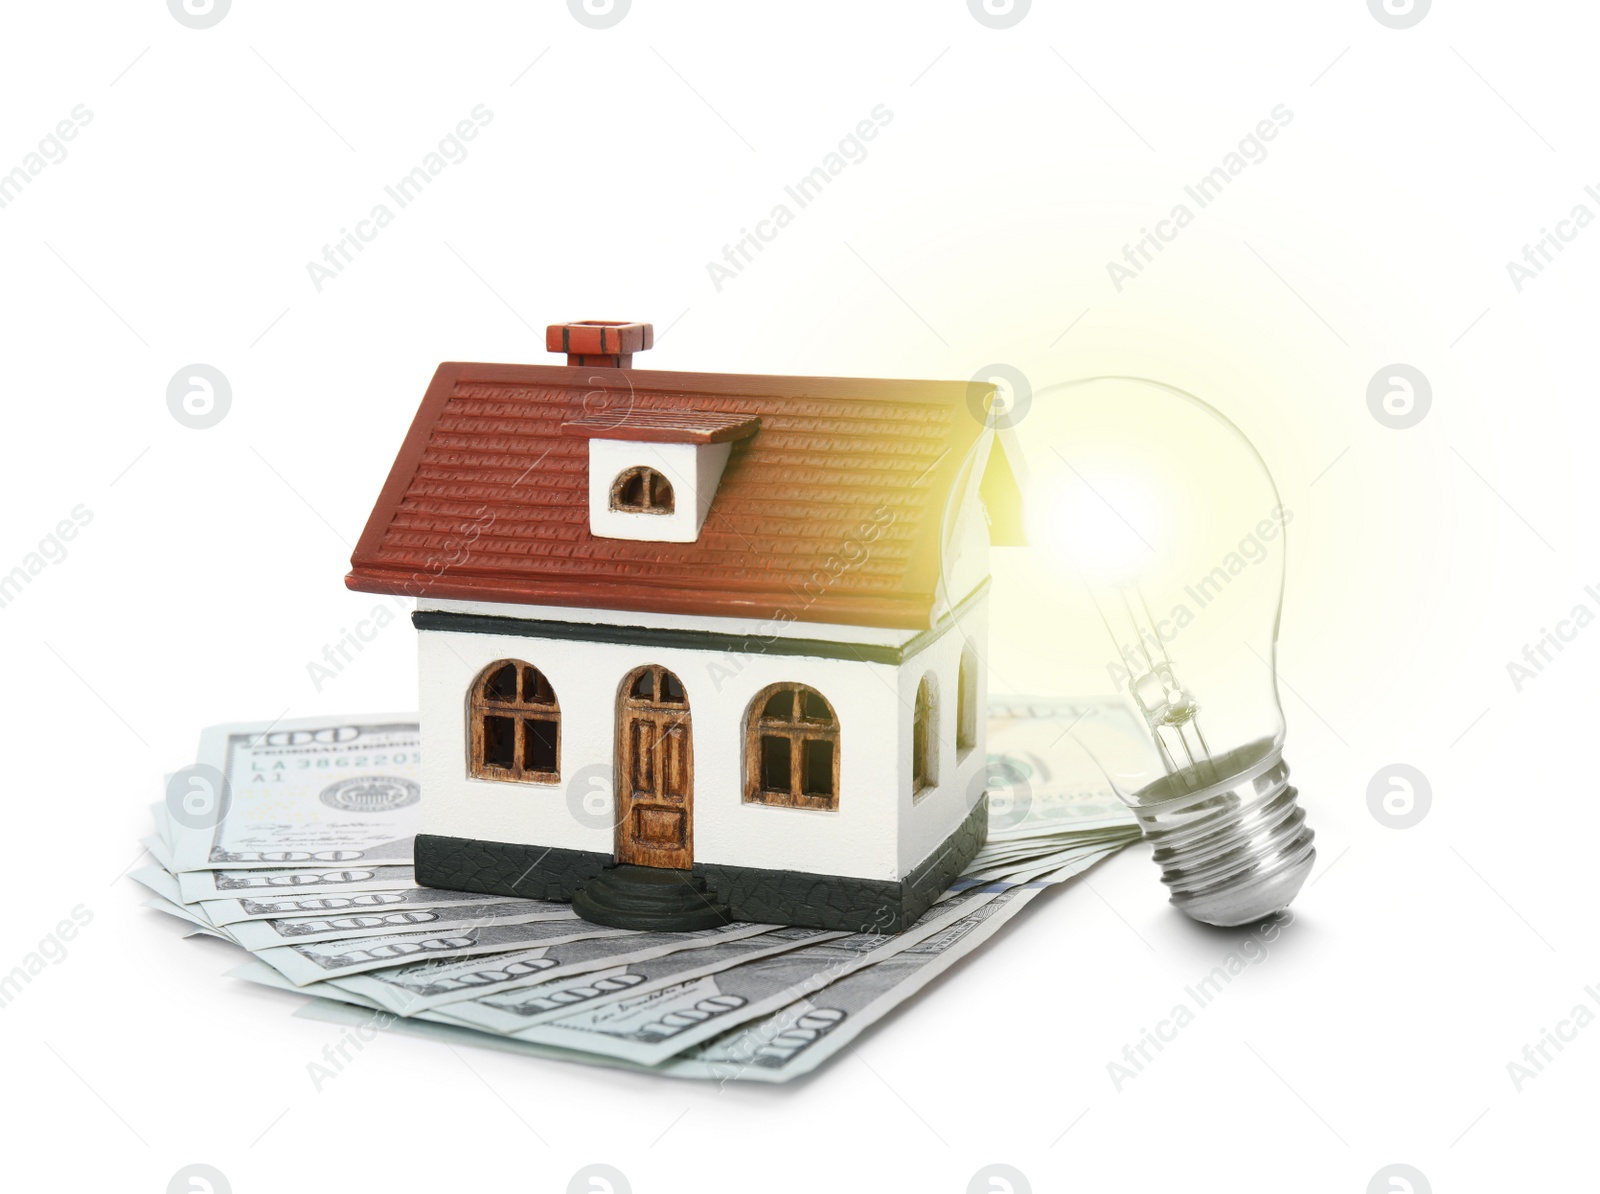 Image of Glowing light bulb, model of house and banknotes on white background. Energy efficiency, loan, property or business idea concepts